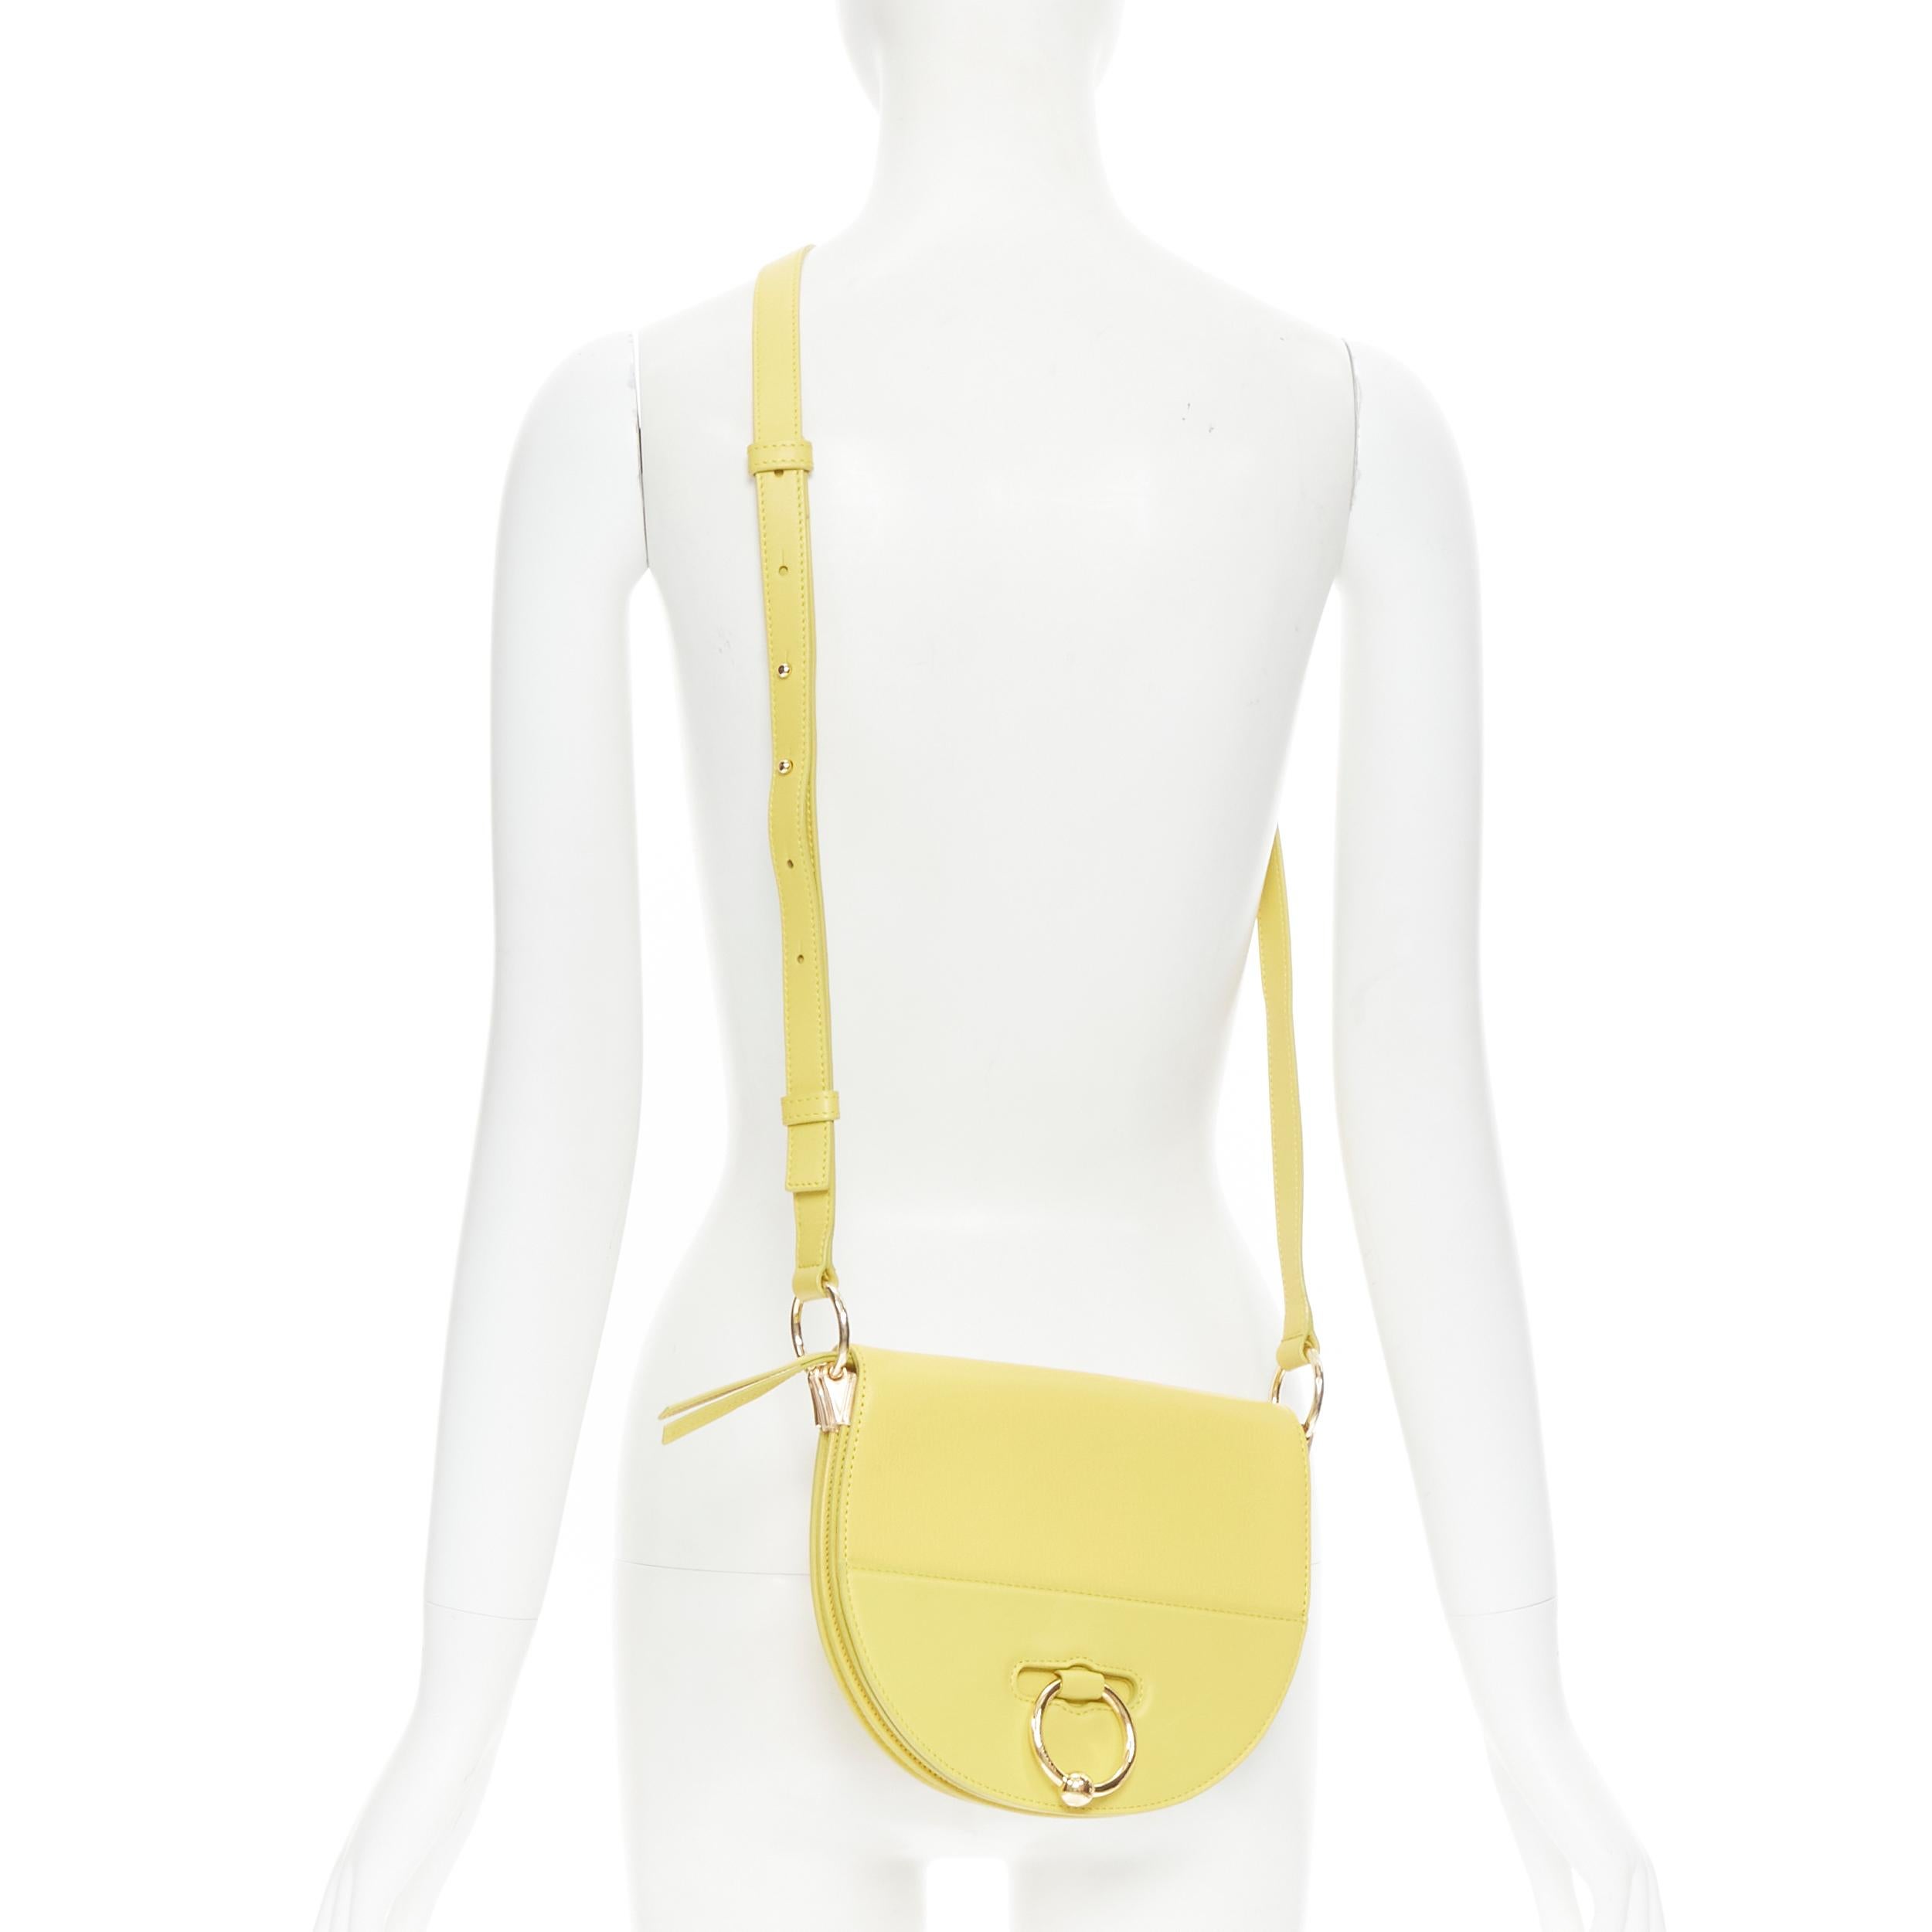 new JW ANDERSON Latch yellow gold Pierce ring crossbody saddle bag 
Reference: TGAS/B01175 
Brand: J.W. Anderson 
Designer: J.W. Anderson 
Model: Latch Bag yellow 
Collection: Pierce 
Material: Leather 
Color: Yellow 
Pattern: Solid 
Extra Detail: